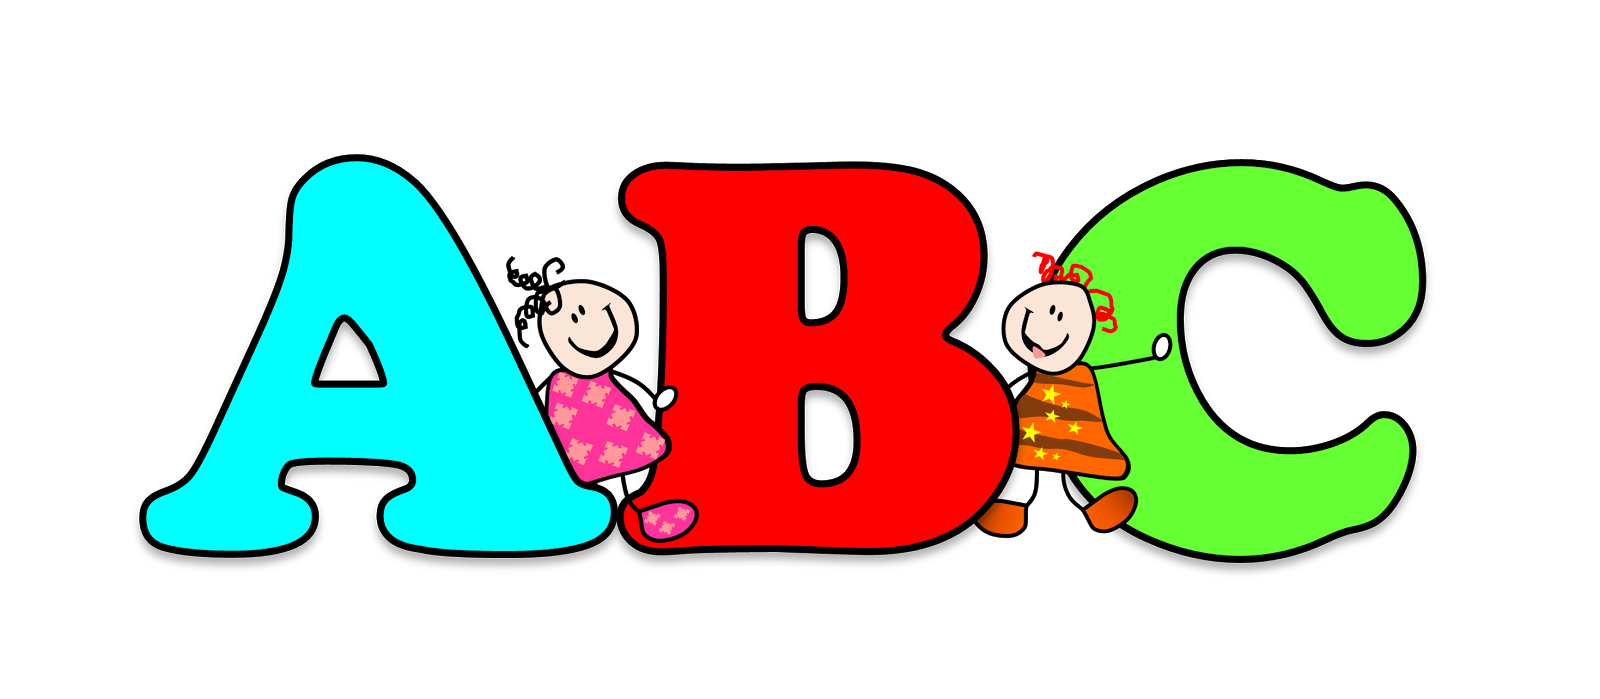 Free Cliparts Banner ABC's, Download Free Clip Art, Free ...